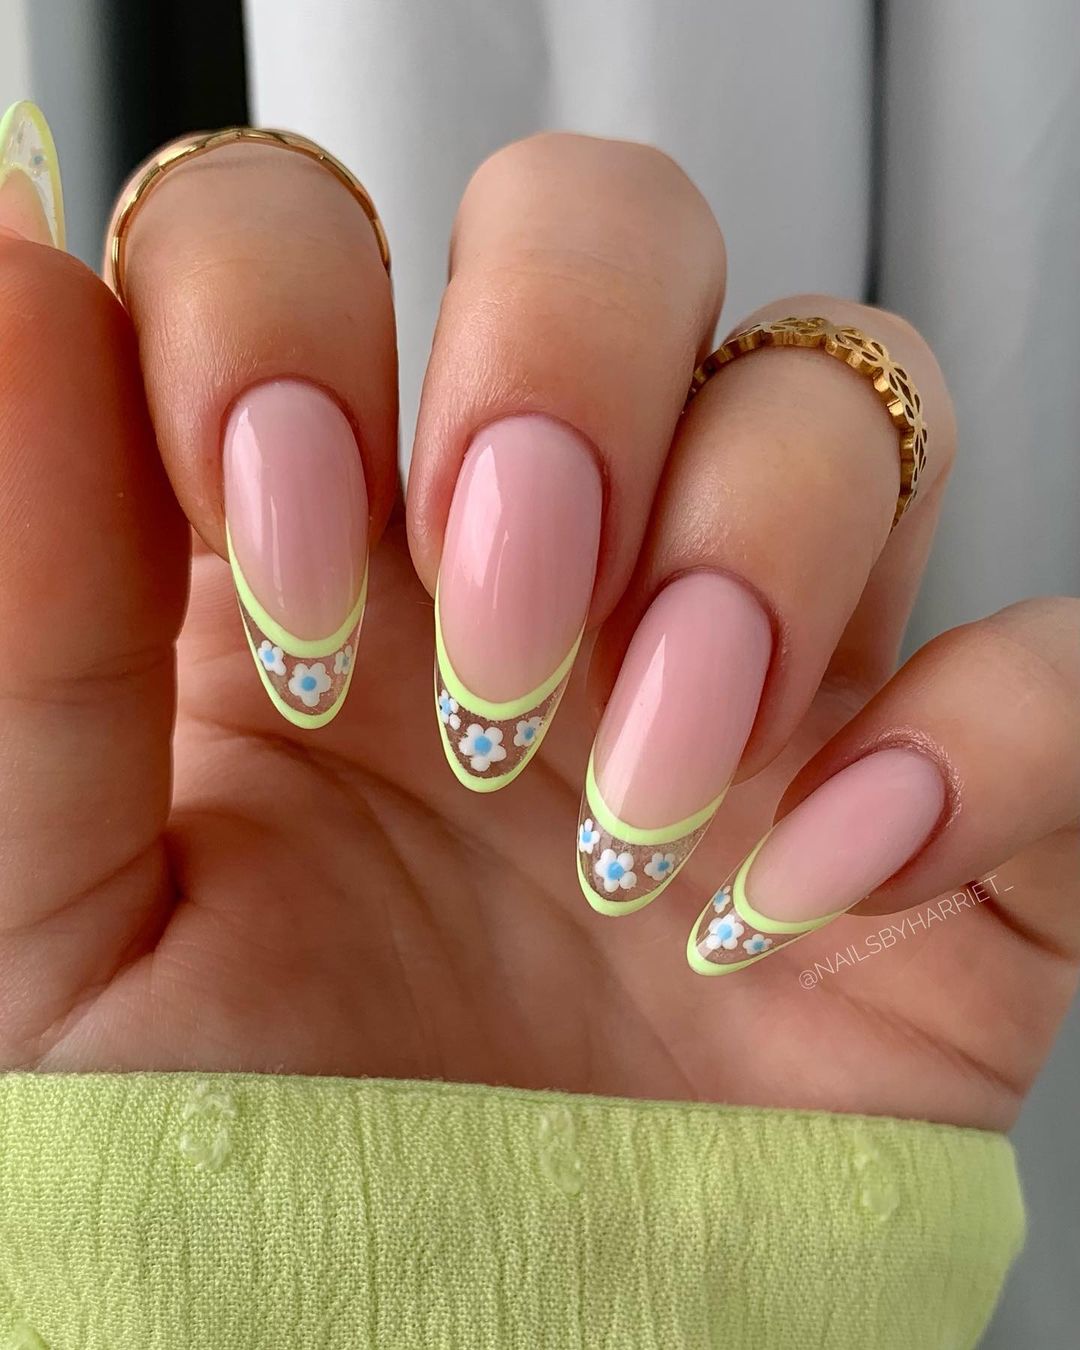 Nude Almond Nails with Floral Design on Tips